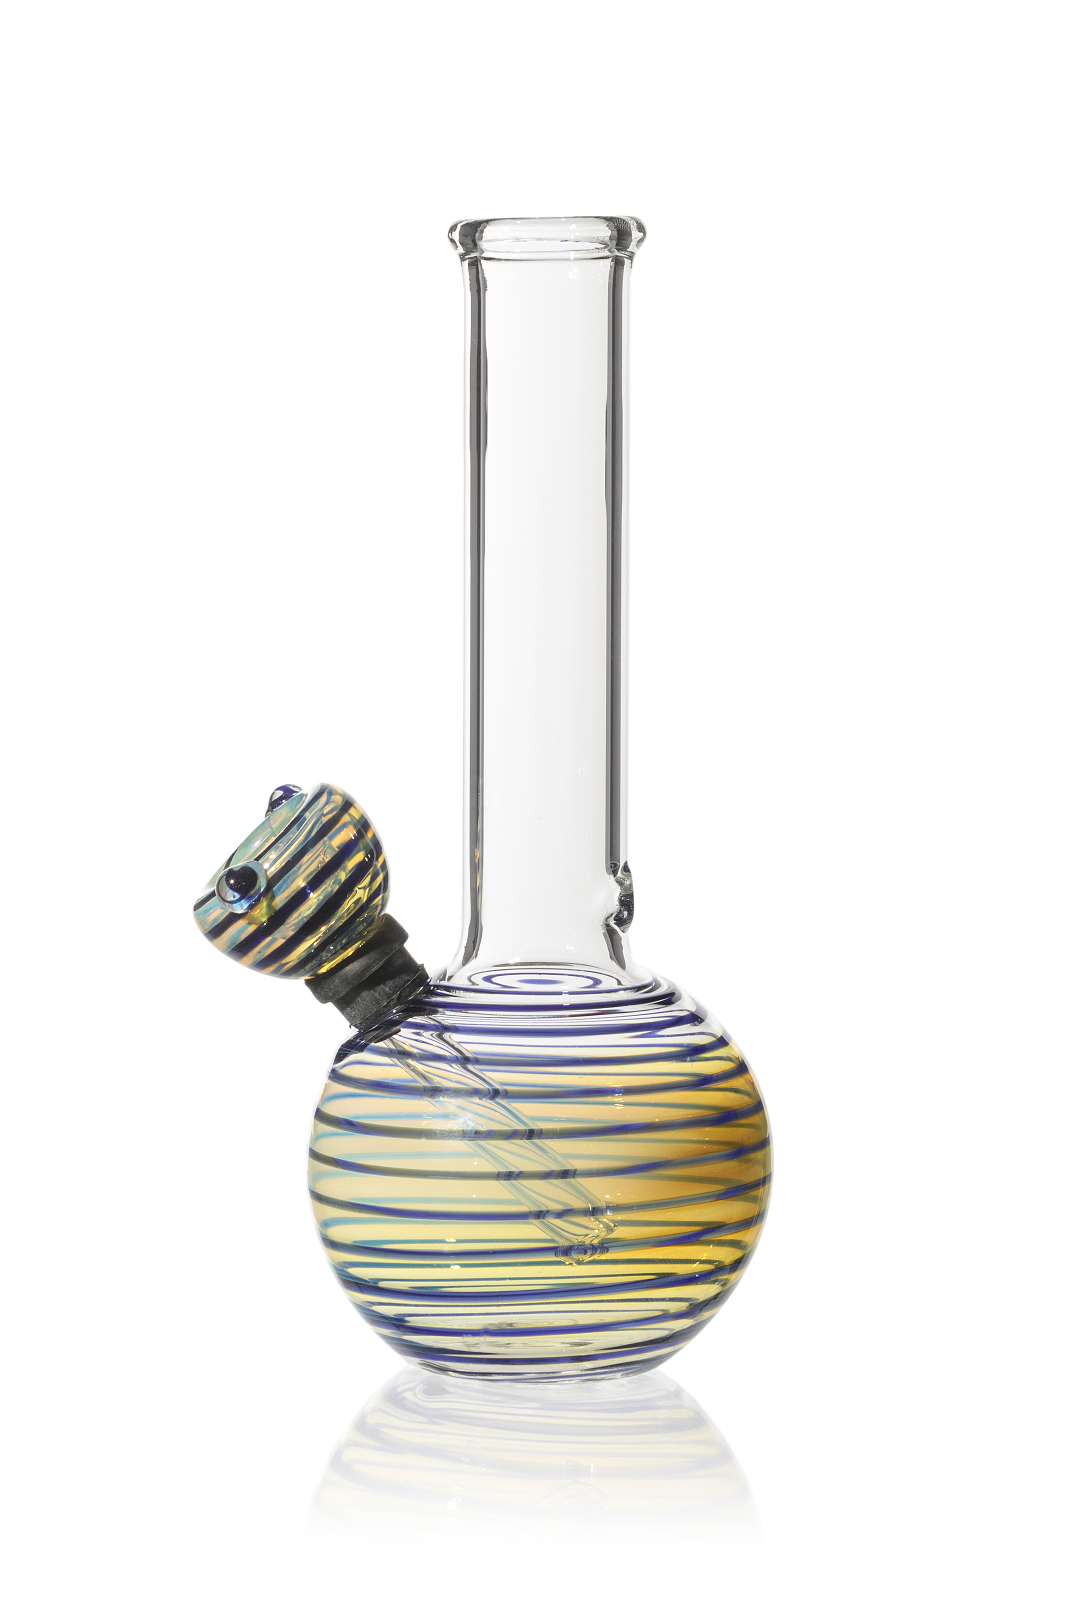 Mini Style Glass Bong with a Carb Blue 5.9 - small bongs, sale